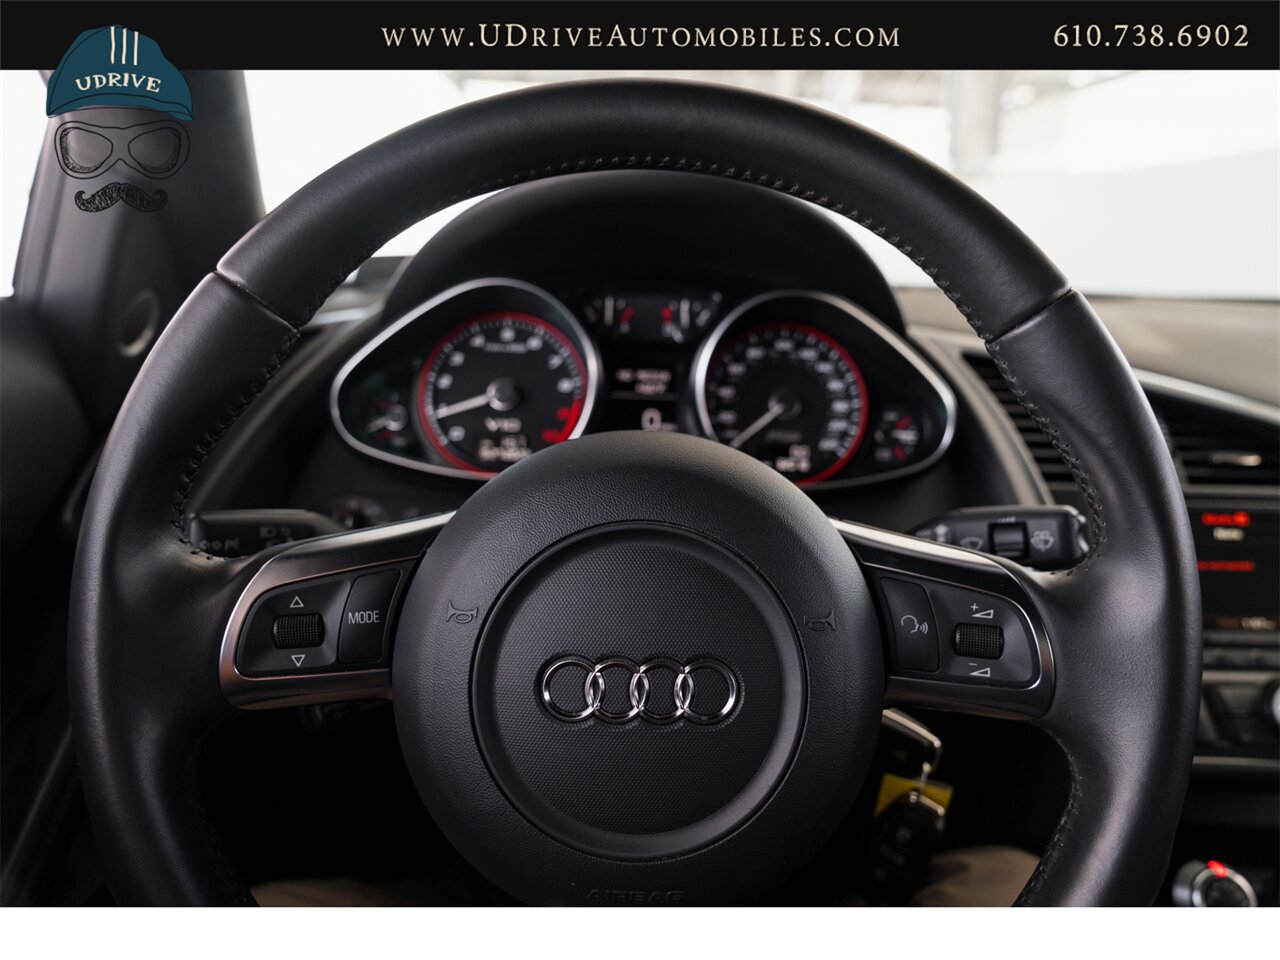 2011 Audi R8 5.2 Quattro  V10 6 Speed Manual - Photo 32 - West Chester, PA 19382